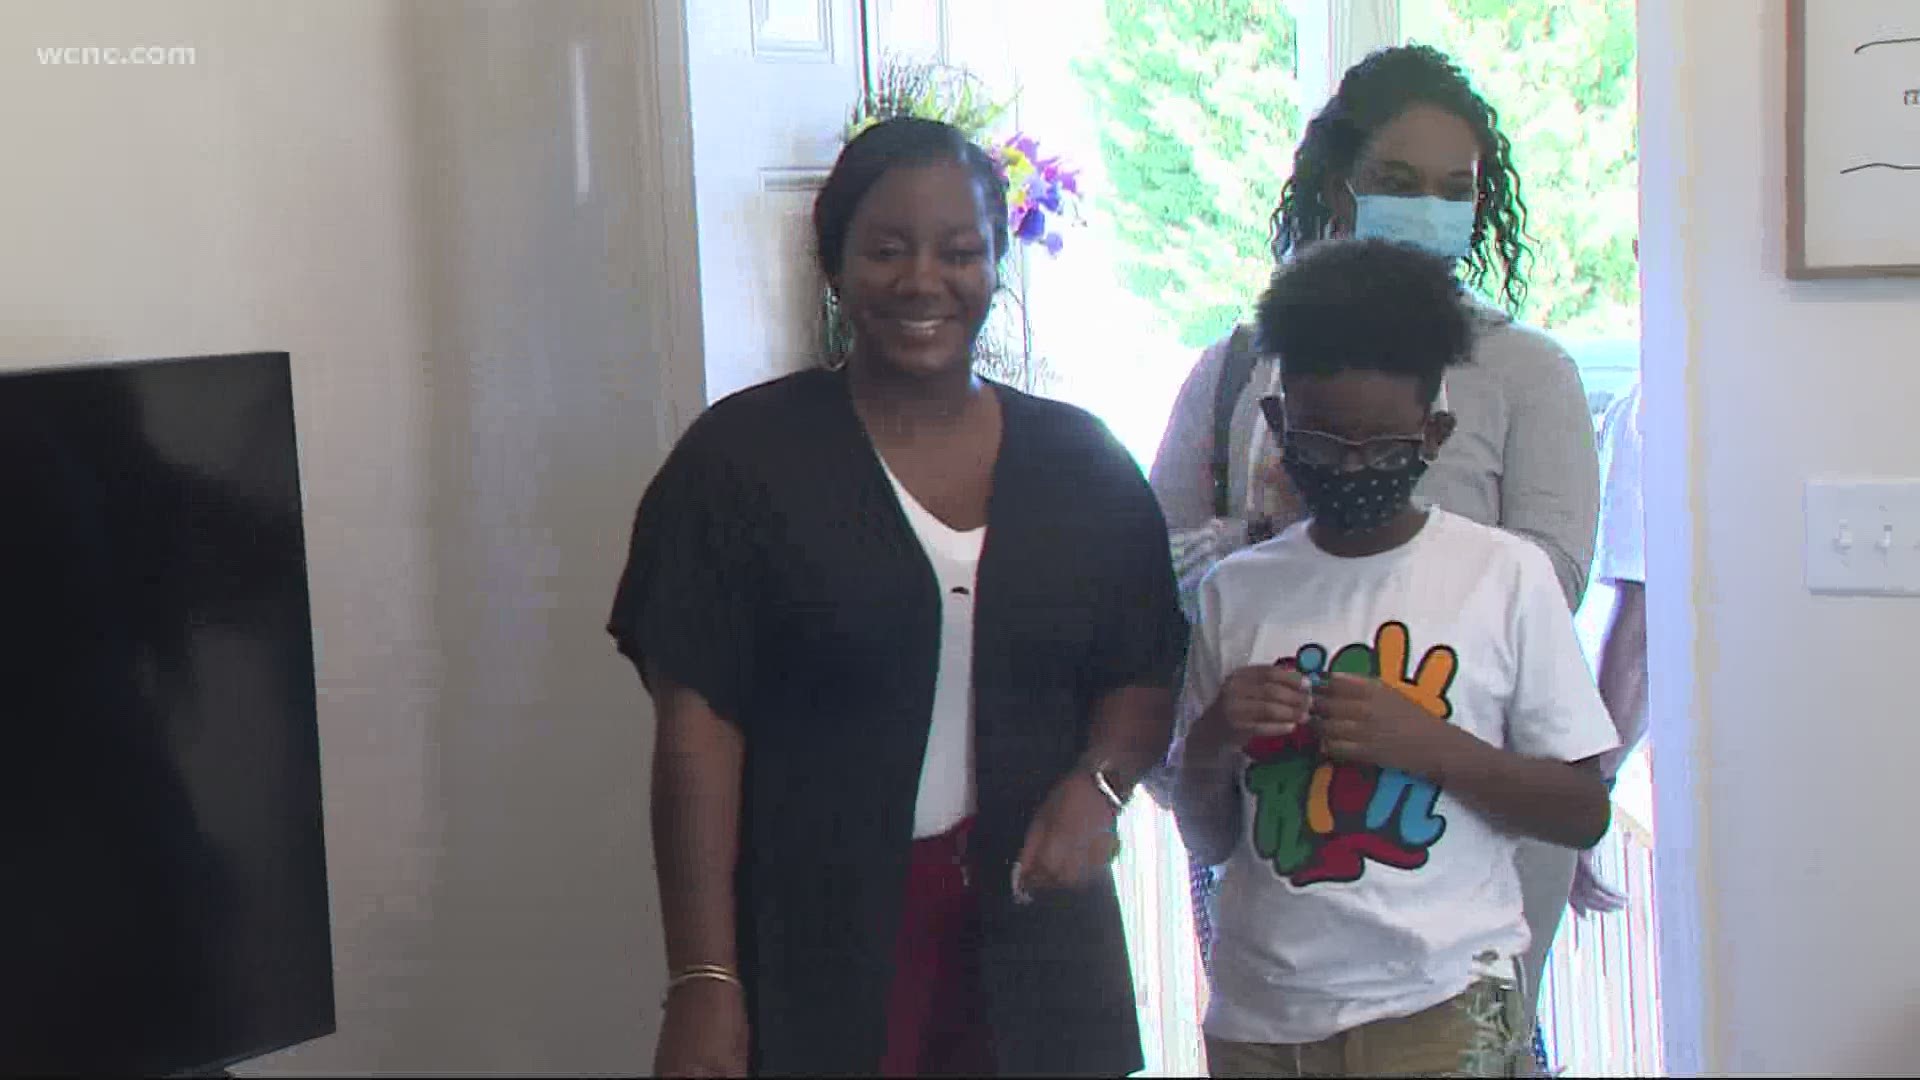 The home was gifted to her through Warrick Dunn Charities.